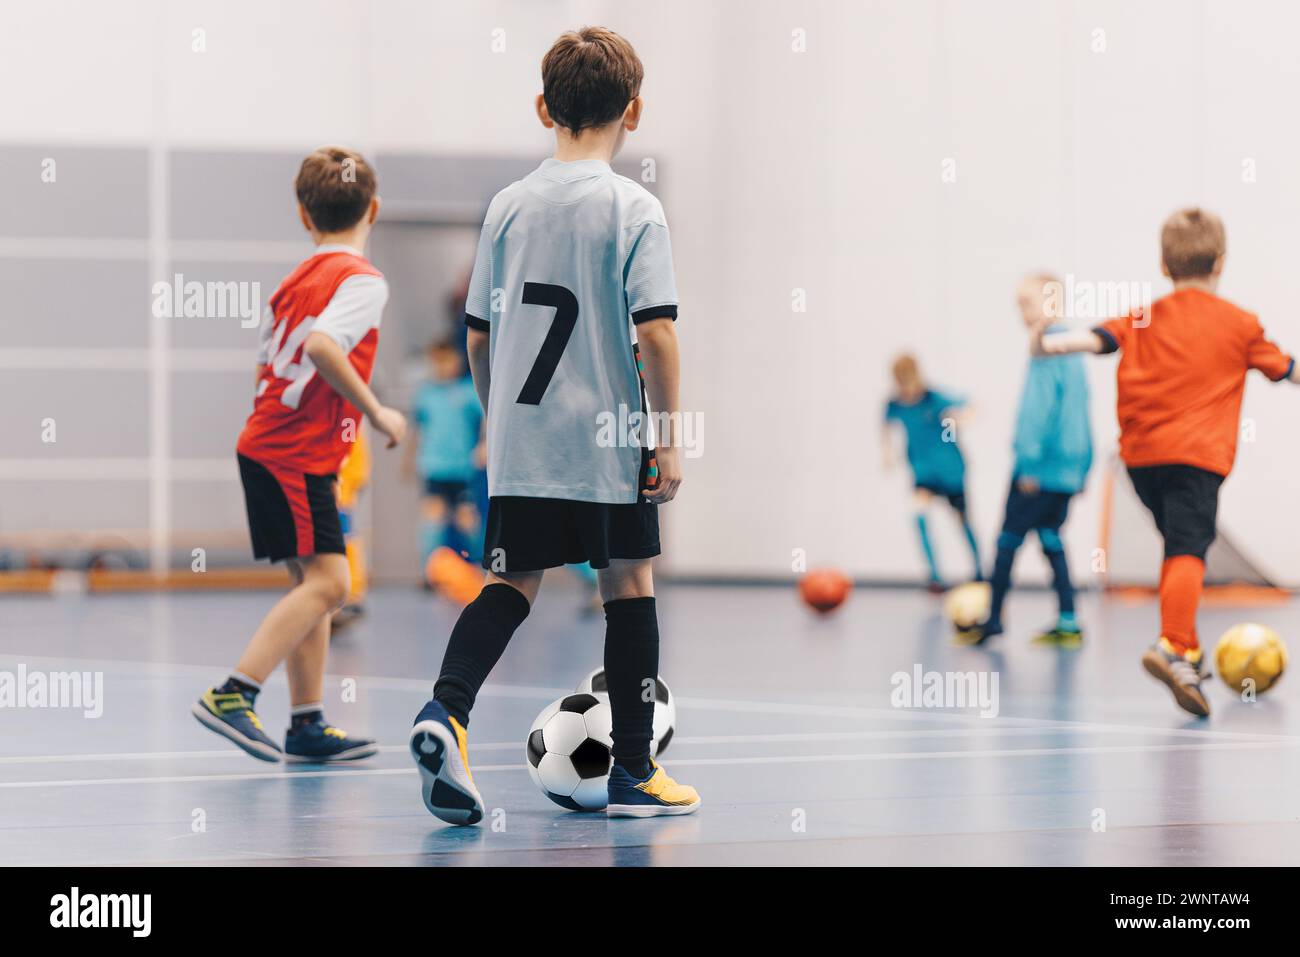 Futsal Boys in Training Game. Kids Play Indoor Soccer Practice Match. School Children Have Fun in Physical Education Class Stock Photo